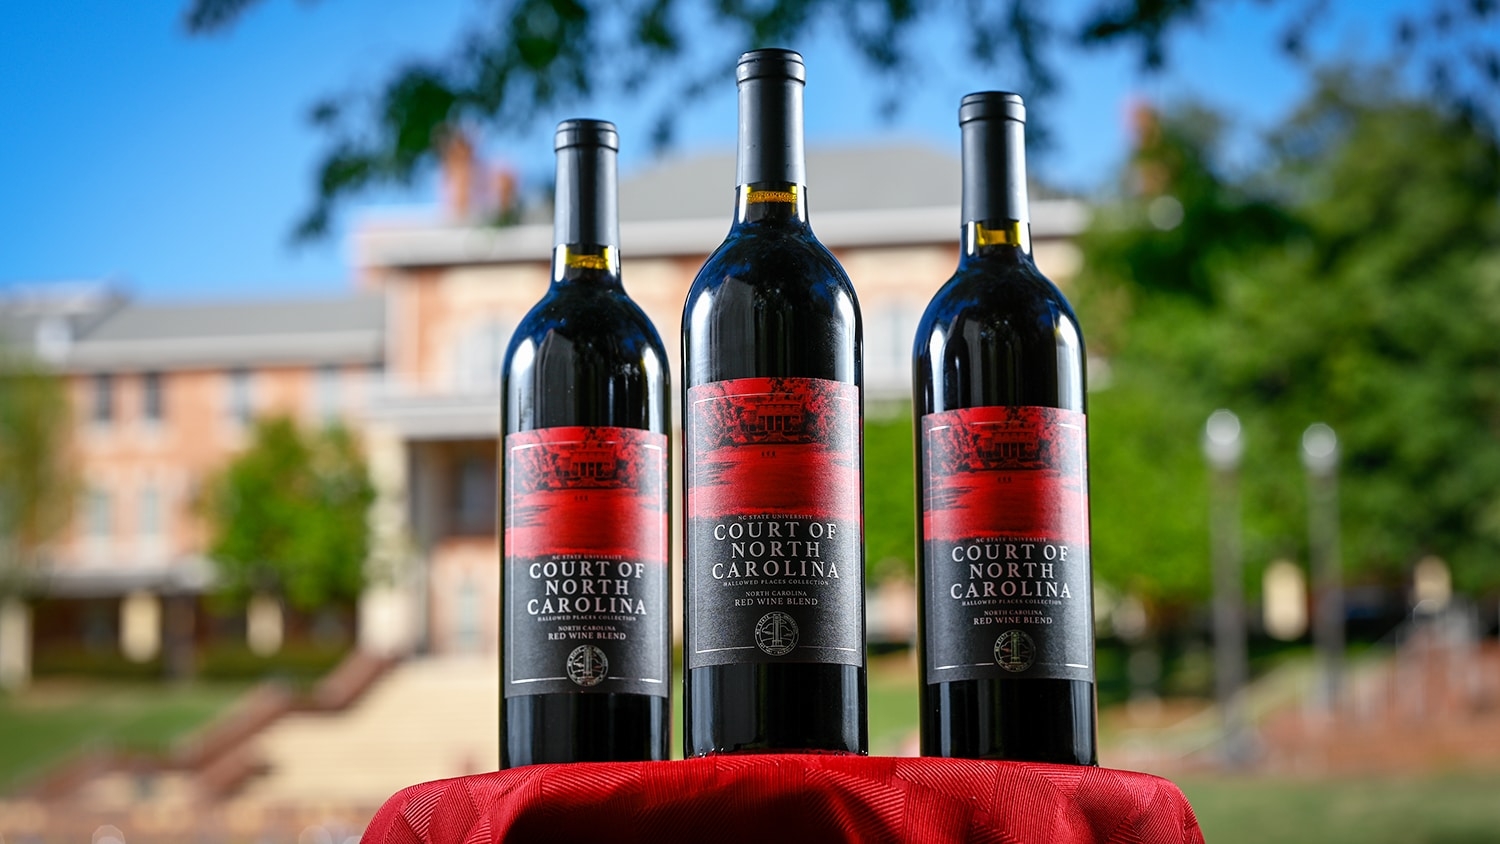 Three bottles of NC State's second wine in its licensed wine series pictured at the Court of North Carolina.